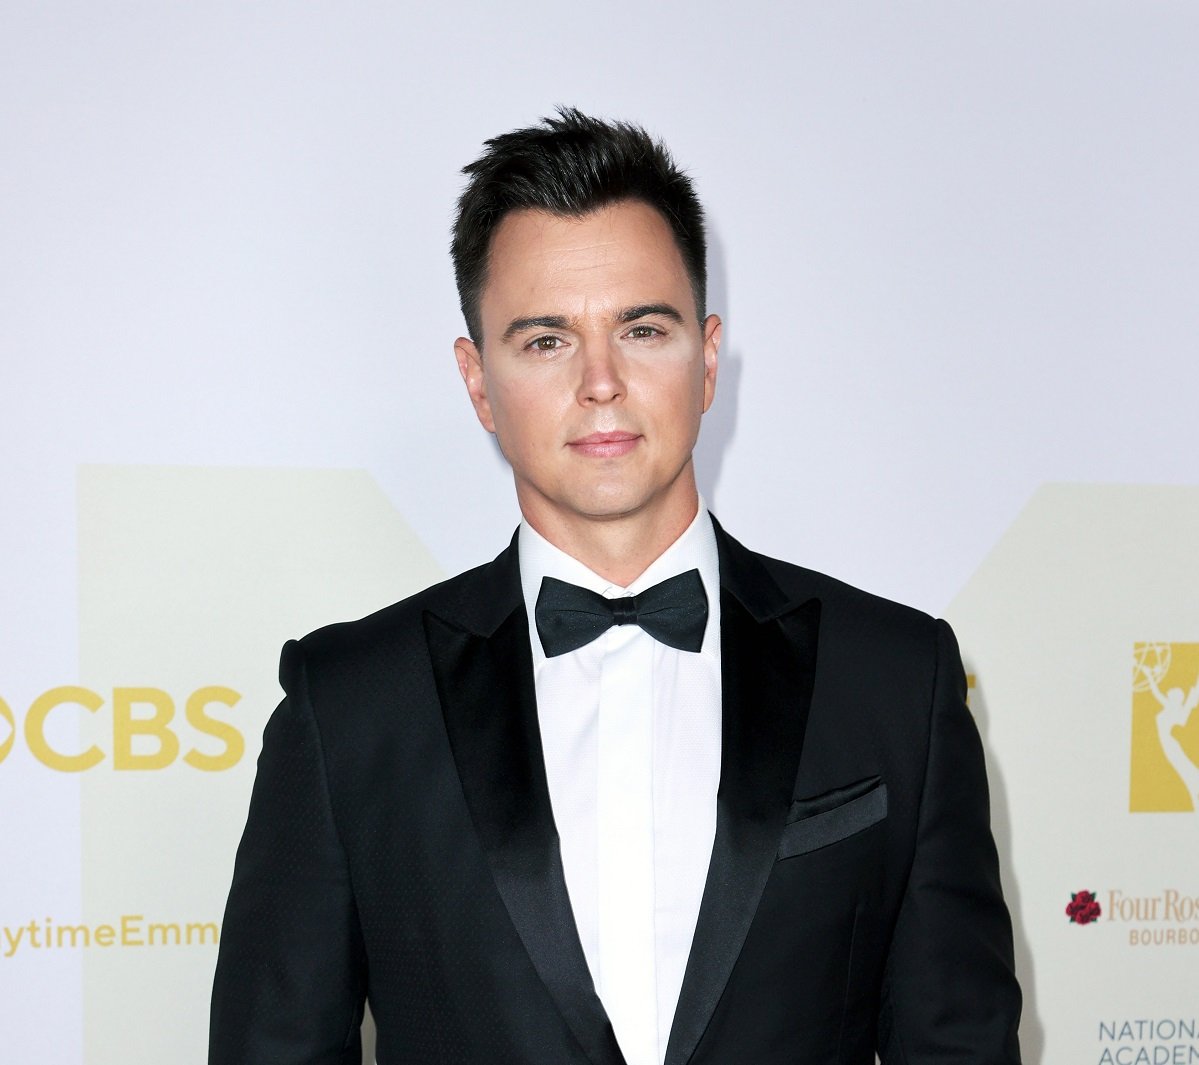 'The Bold and the Beautiful' actor Darin Brooks in a tuxedo poses for a photo on the red carpet.